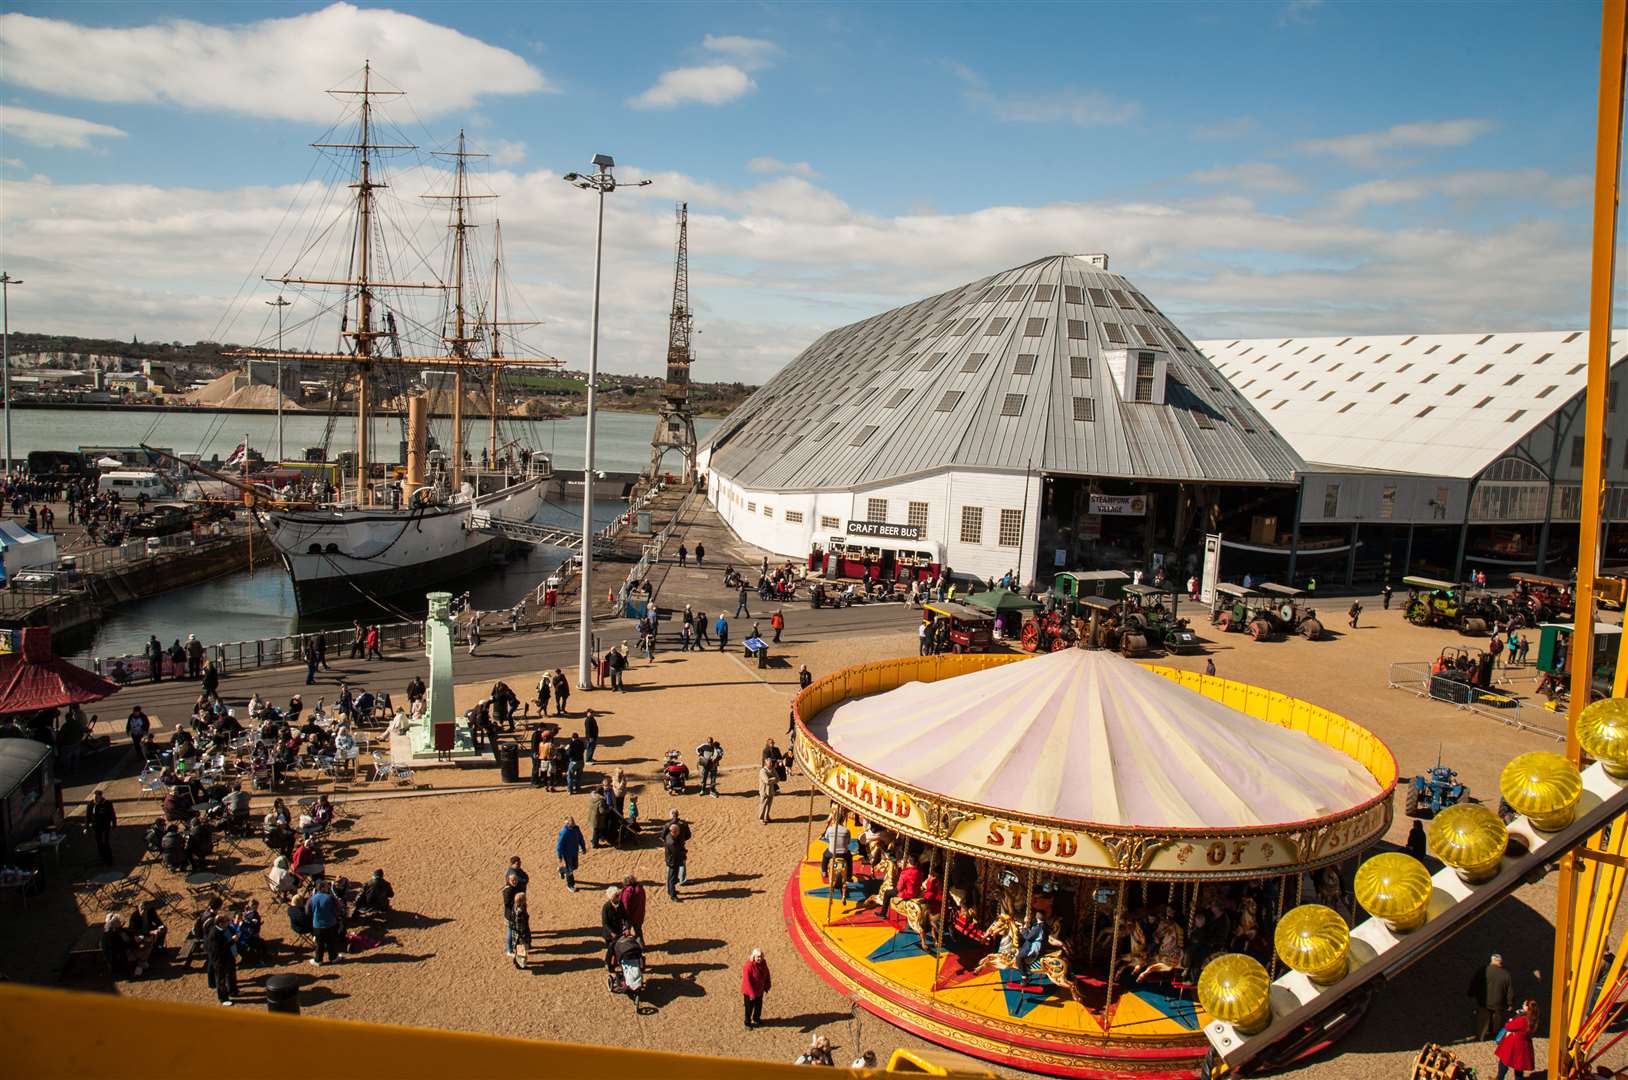 The Festival of Steam and Transport will transform the dockyard for Easter